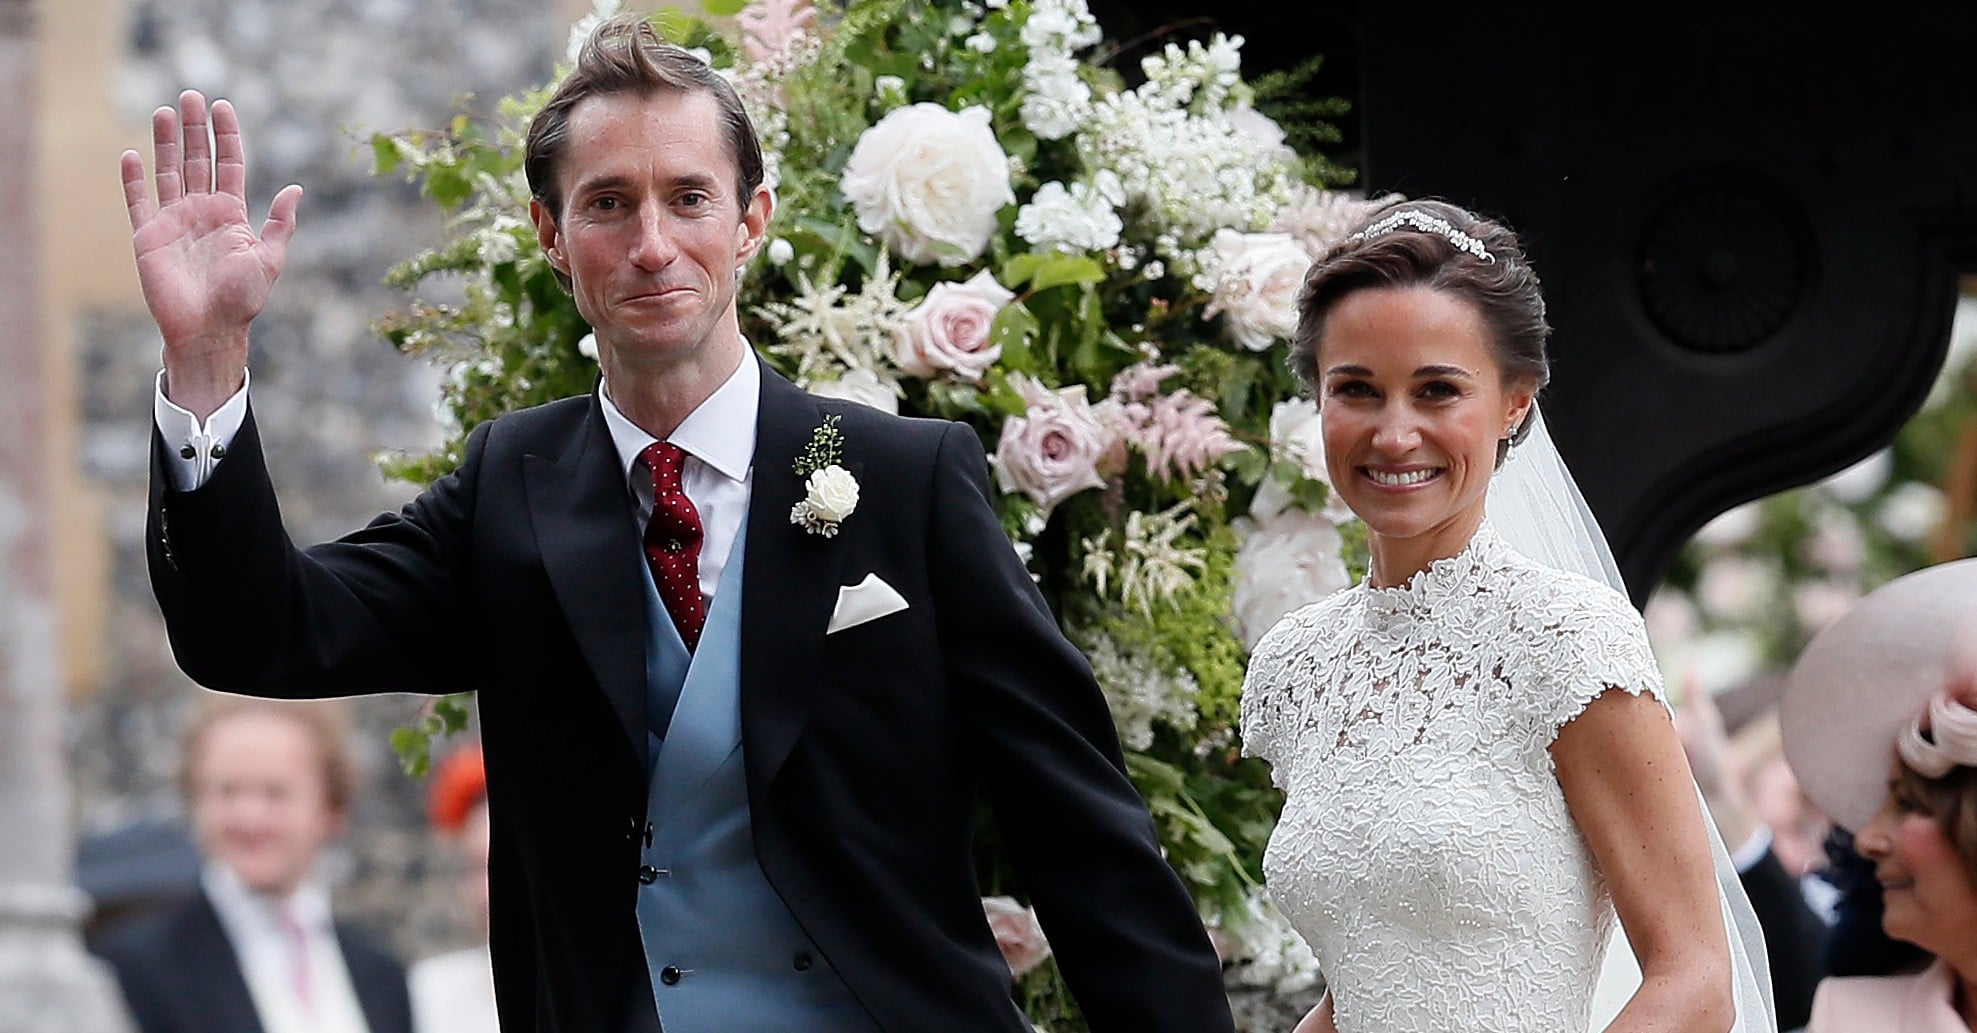 Pippa Middleton, Alicia Vikander, and More: The Best Bridal Moments of 2017